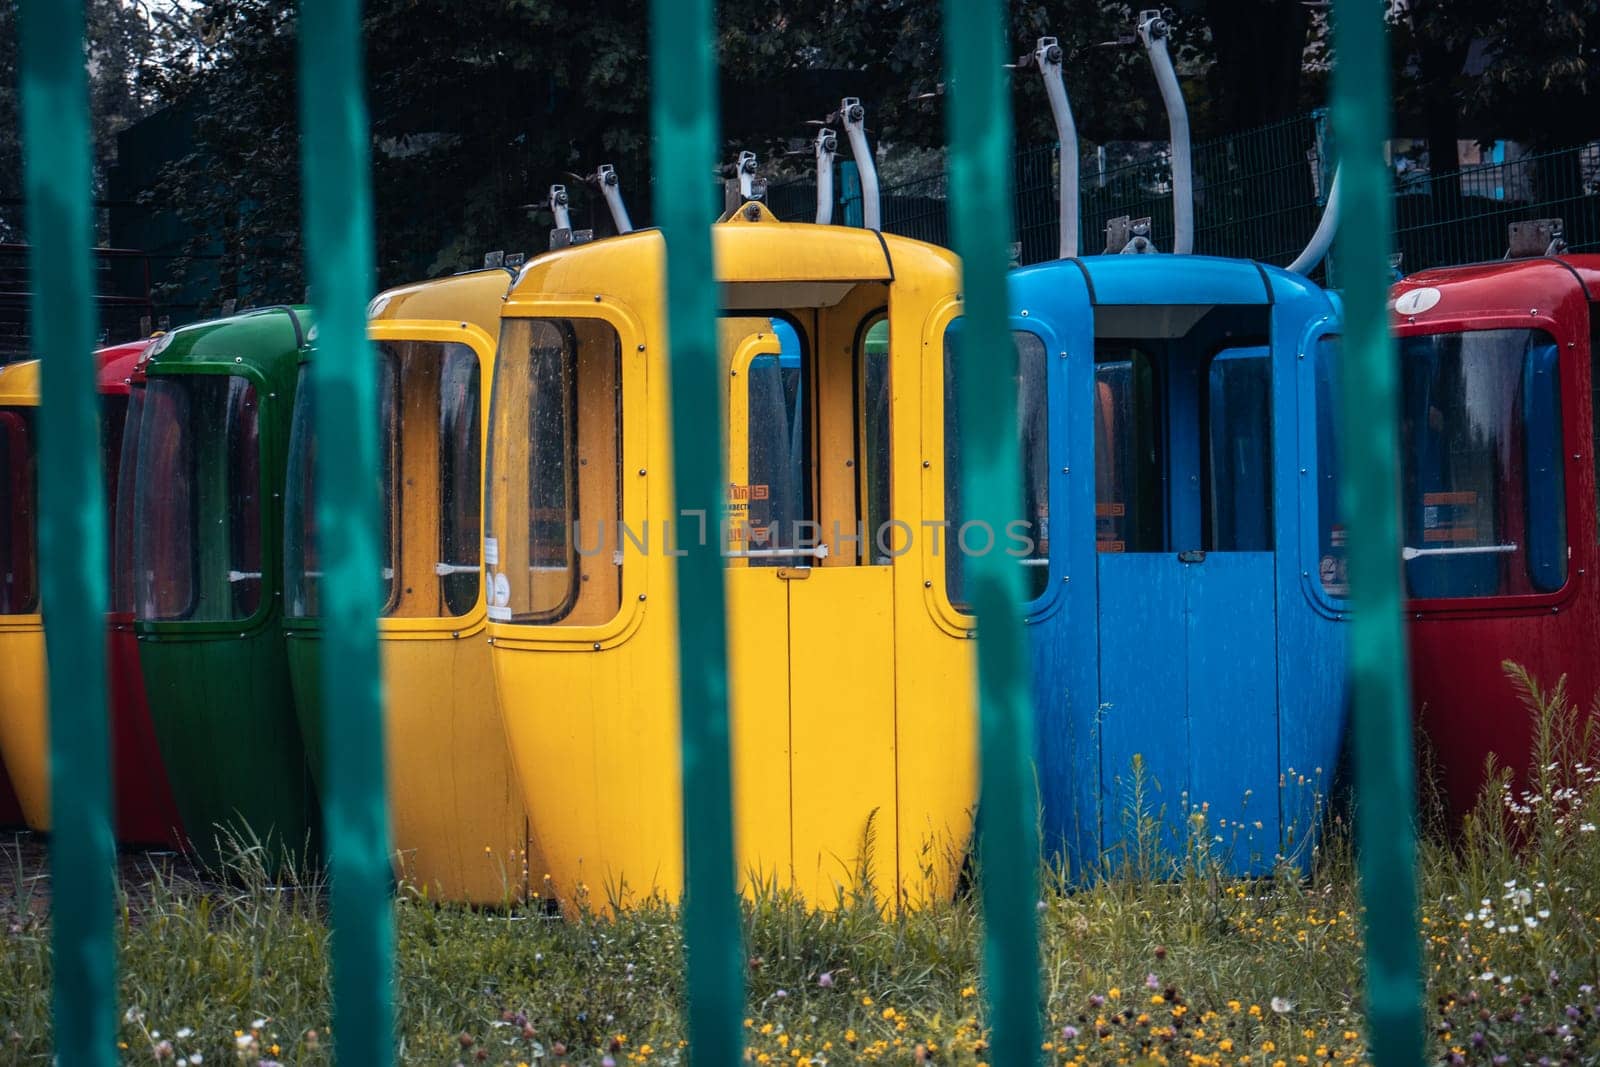 Abandoned colorful funicular vehicle behind fence concept photo. Street scene, parkland. Cableway for transporting people in amusement park. High quality picture for wallpaper, travel blog.